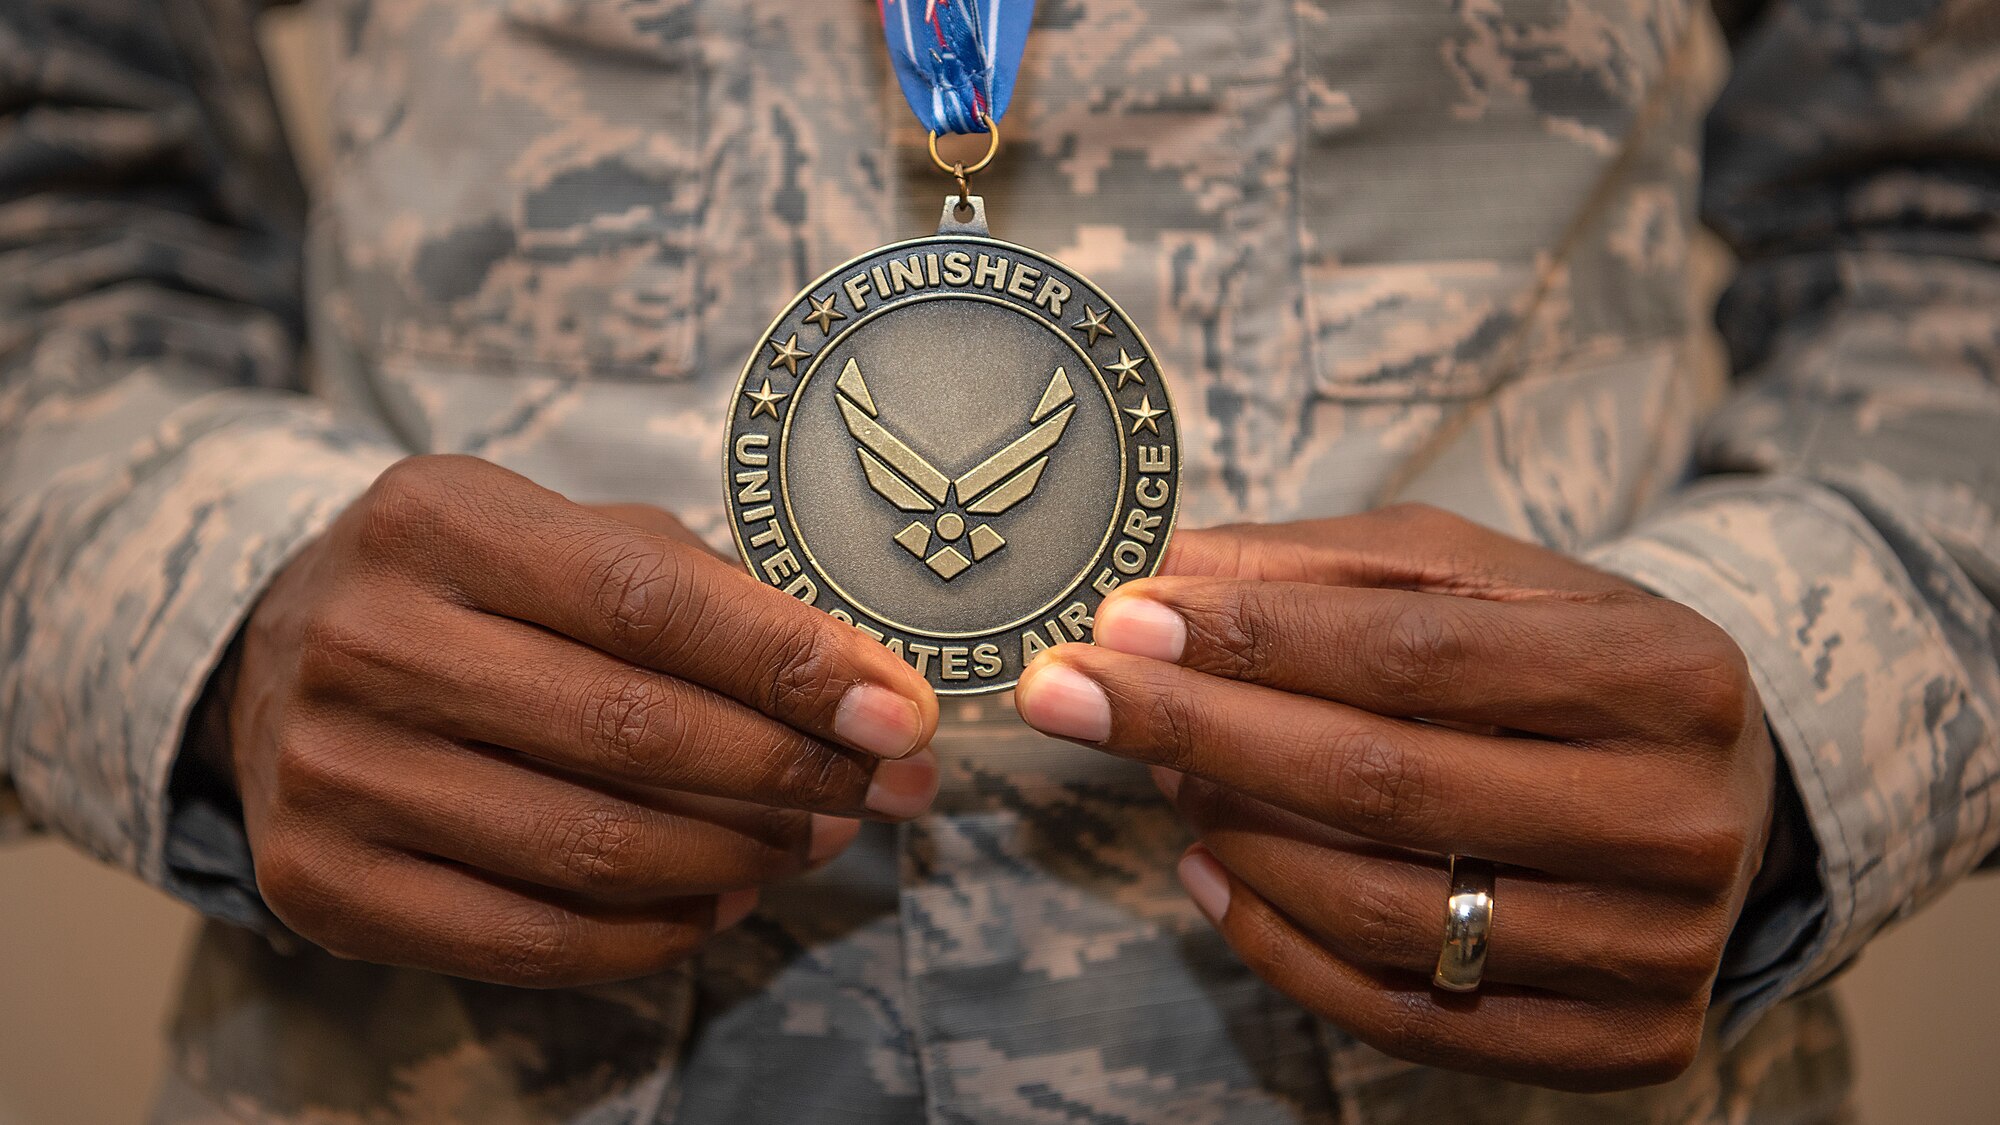 Airman 1st Class Daniel Kirwa, a medical technician assigned to the 6th Healthcare Operations Squadron, pauses for a photo with his finisher medal from the Air Force Marathon, Oct. 9, 2019. Kirwa placed first in the military category of the Air Force Marathon, and third overall, with a time of 2 hours, 33 minutes, and 3 seconds.